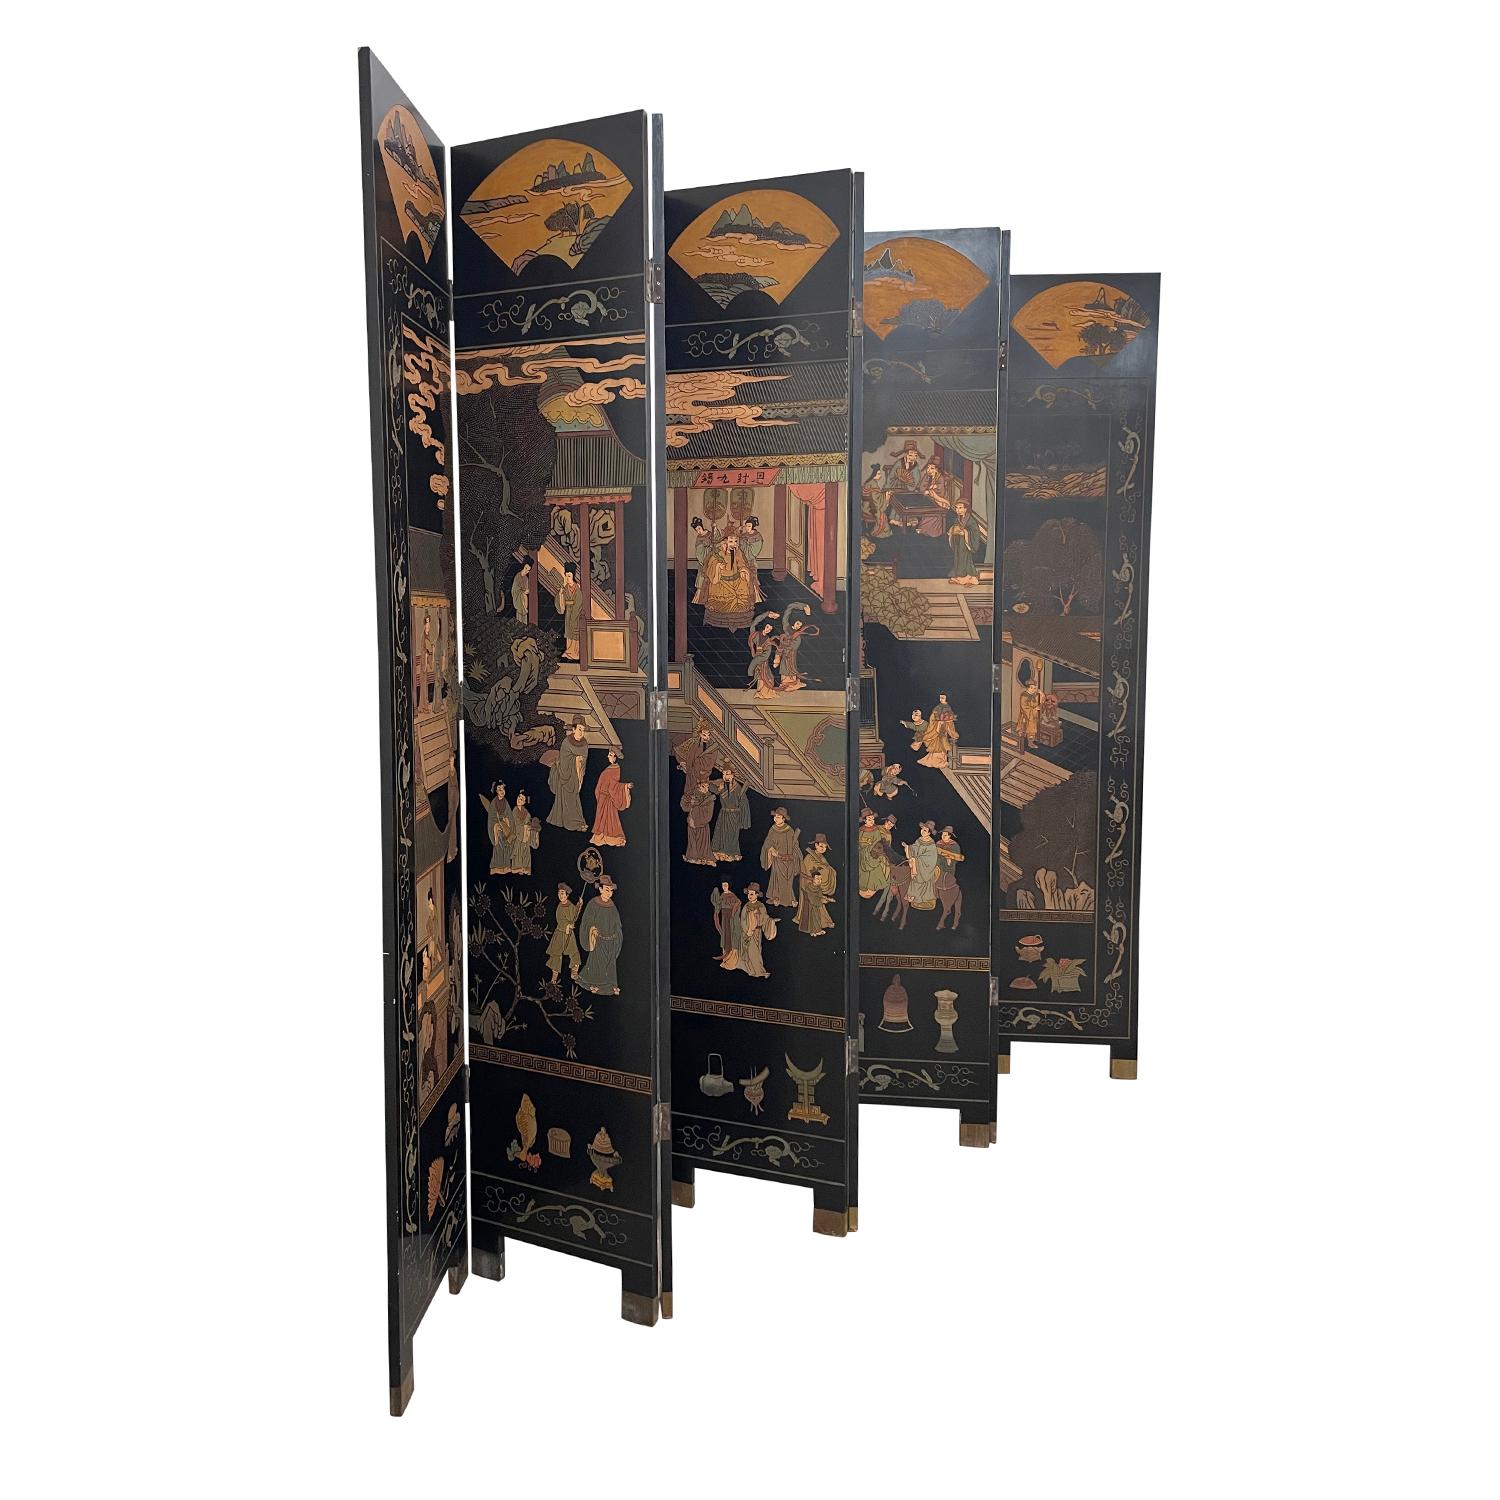 A black, vintage Chinese screen made of hand crafted lacquered wood, in good condition. The large, detailed Chinoiserie style room divider is composed with eight flexible, adjustable panels standing on short wooden feet which are inserted in